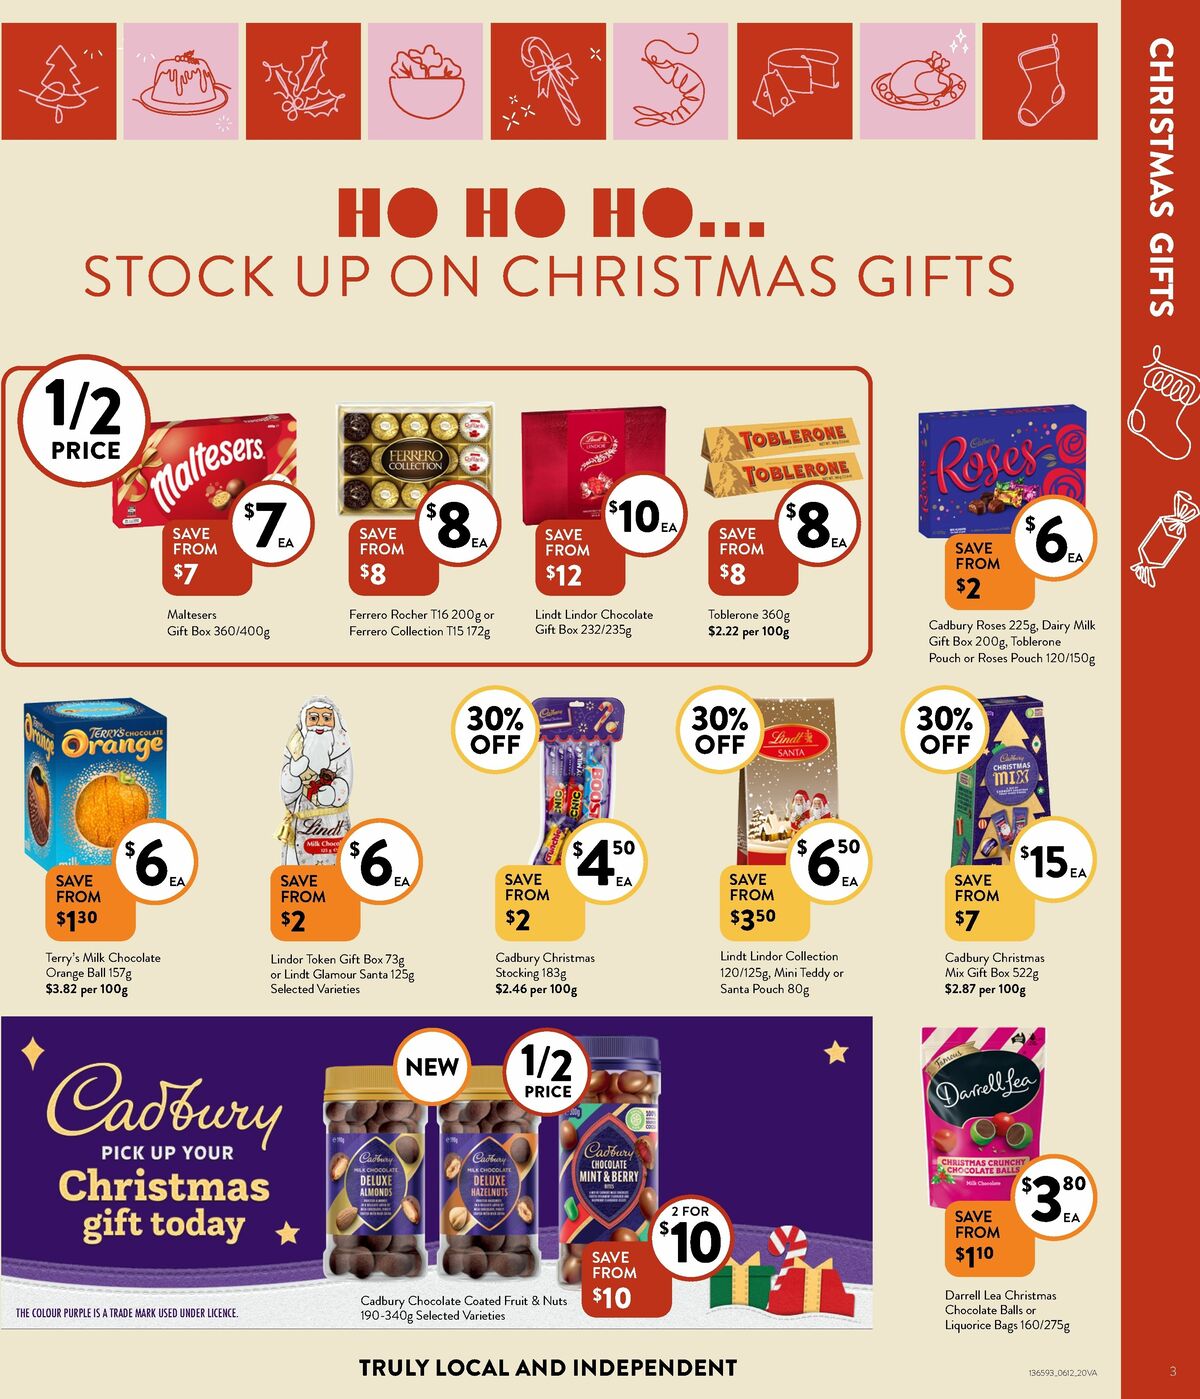 FoodWorks Supermarket Catalogues from 6 December